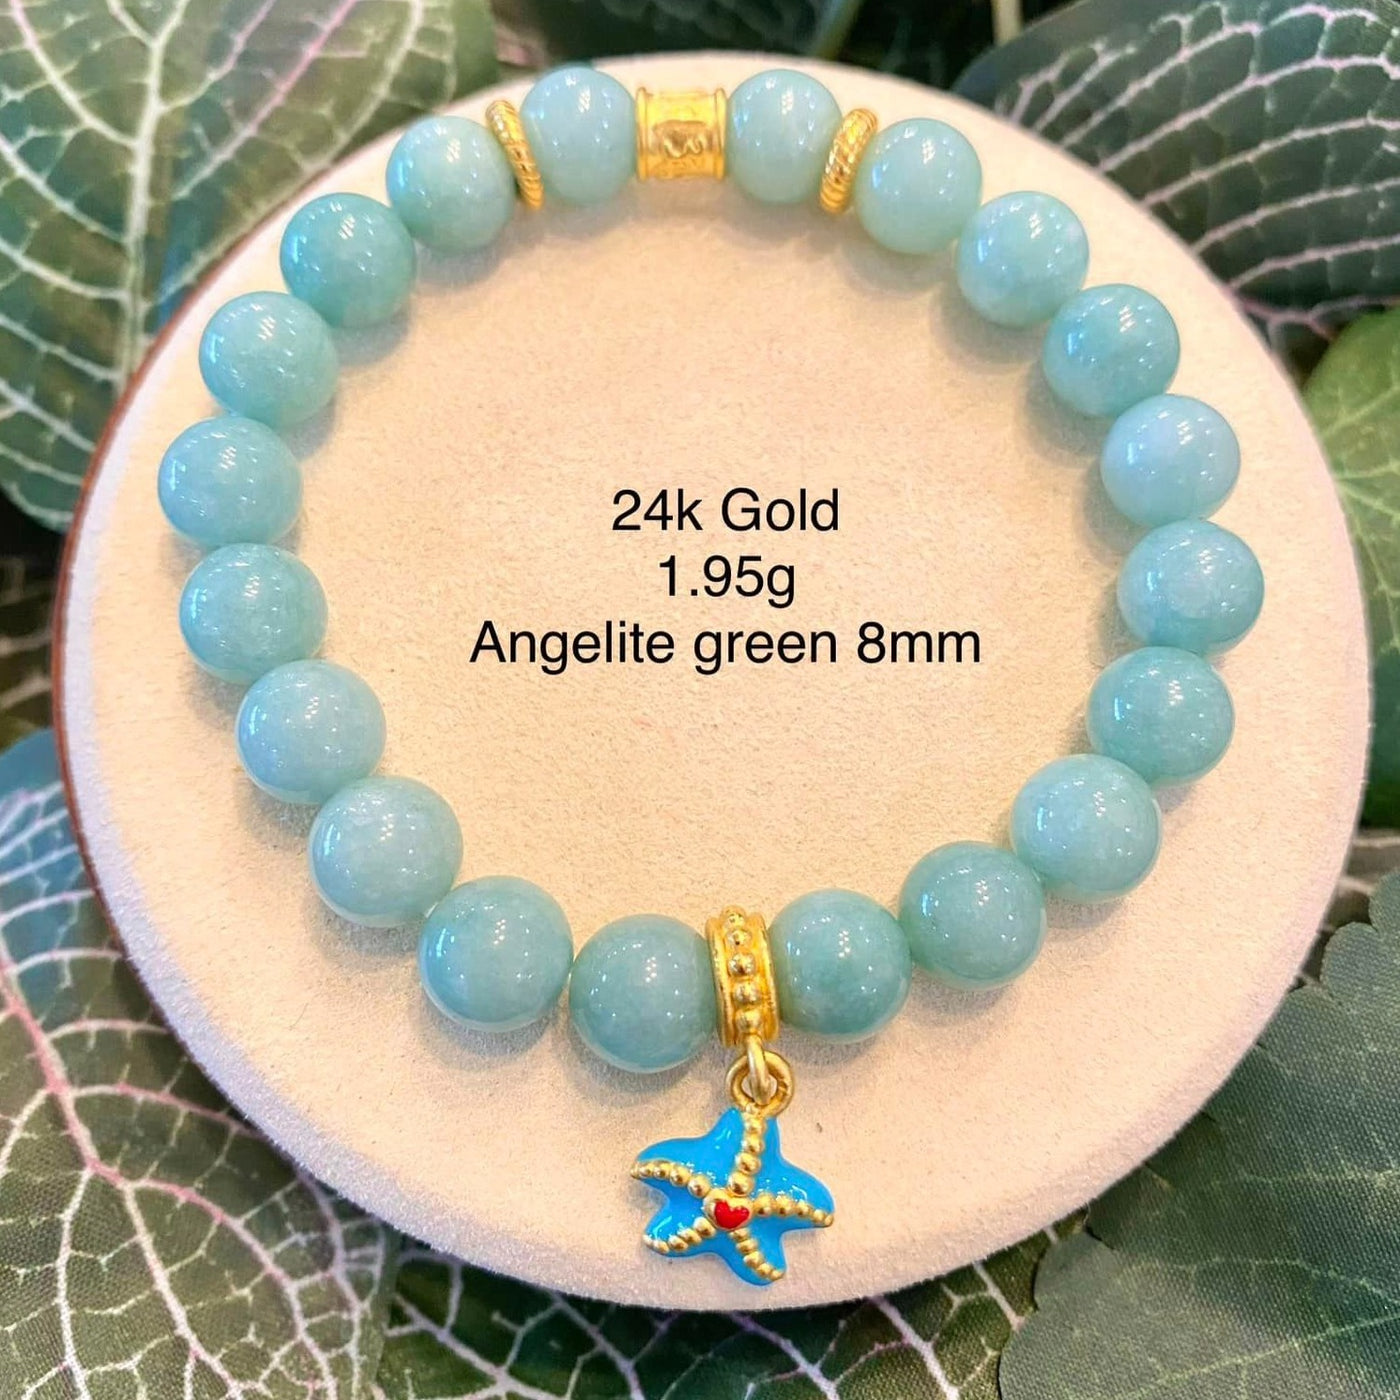 JEWELRY: Blue Star Fish Bracelet in Angelite Green Crystals 8mm